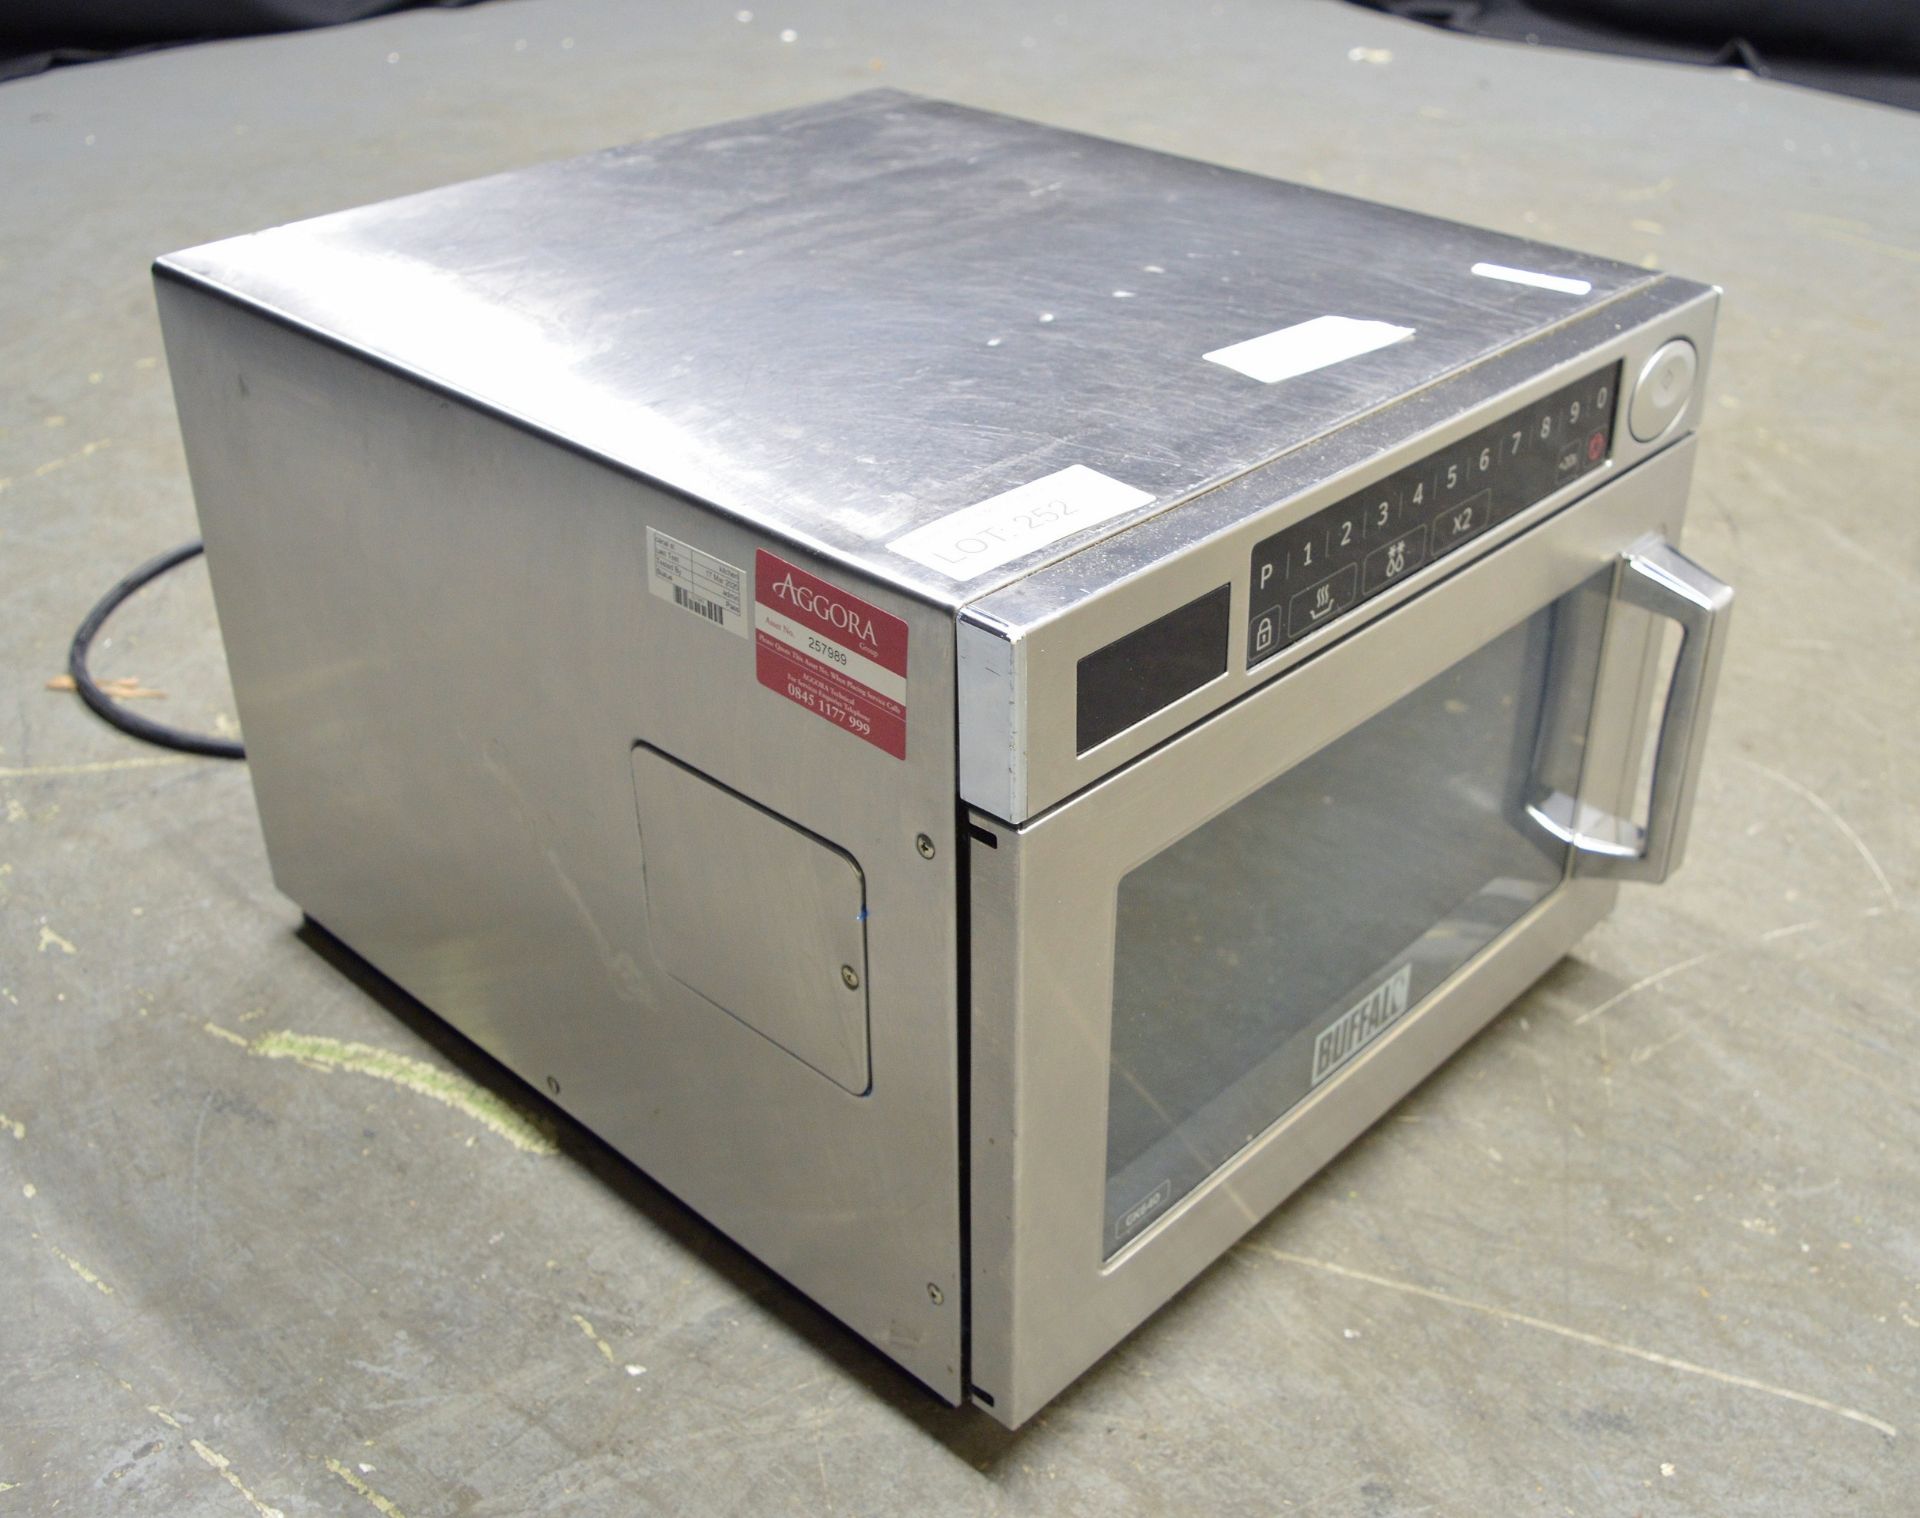 Buffalo GK640 Programmable Commercial Microwave Oven - 240v - Image 2 of 5